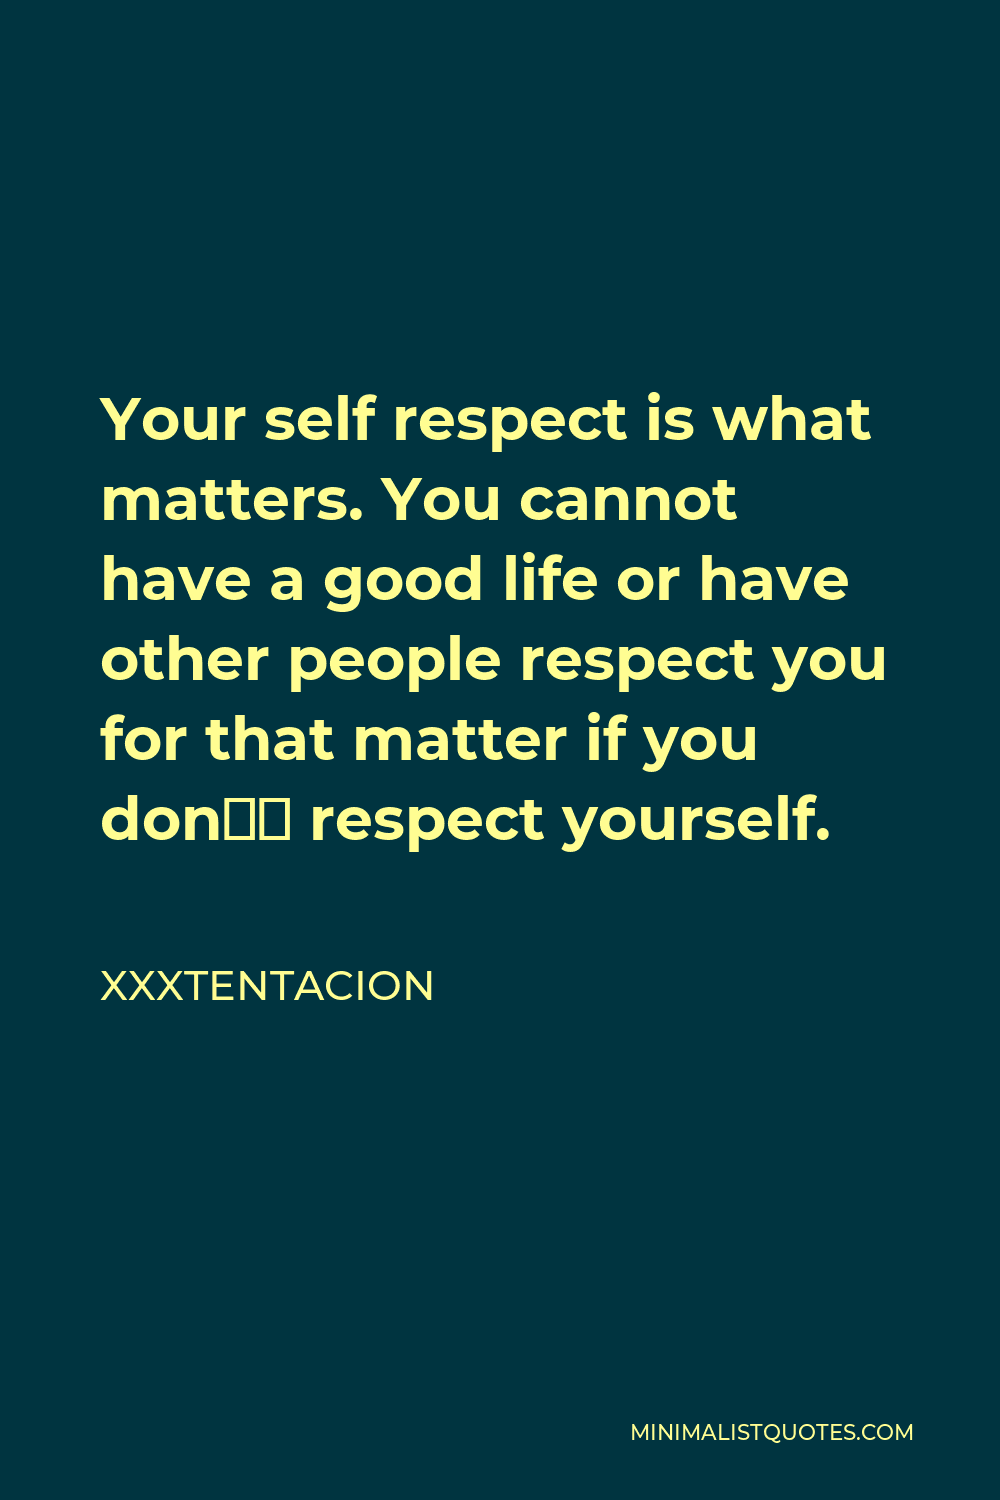 Xxxtentacion Quote: Your self respect is what matters. You cannot ...